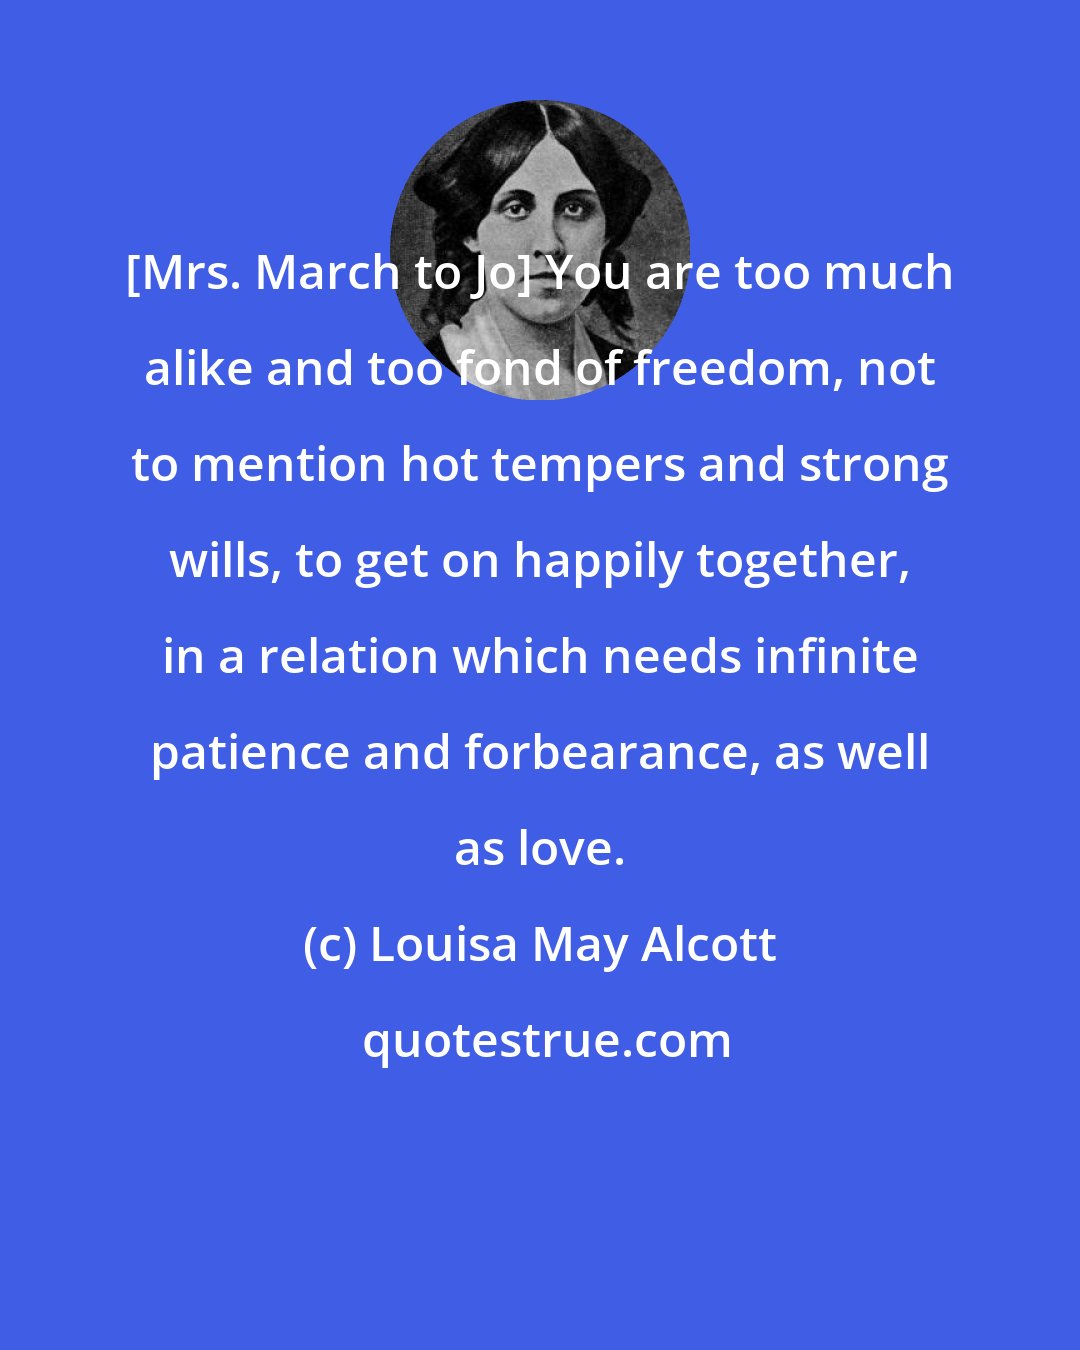 Louisa May Alcott: {Mrs. March to Jo} You are too much alike and too fond of freedom, not to mention hot tempers and strong wills, to get on happily together, in a relation which needs infinite patience and forbearance, as well as love.